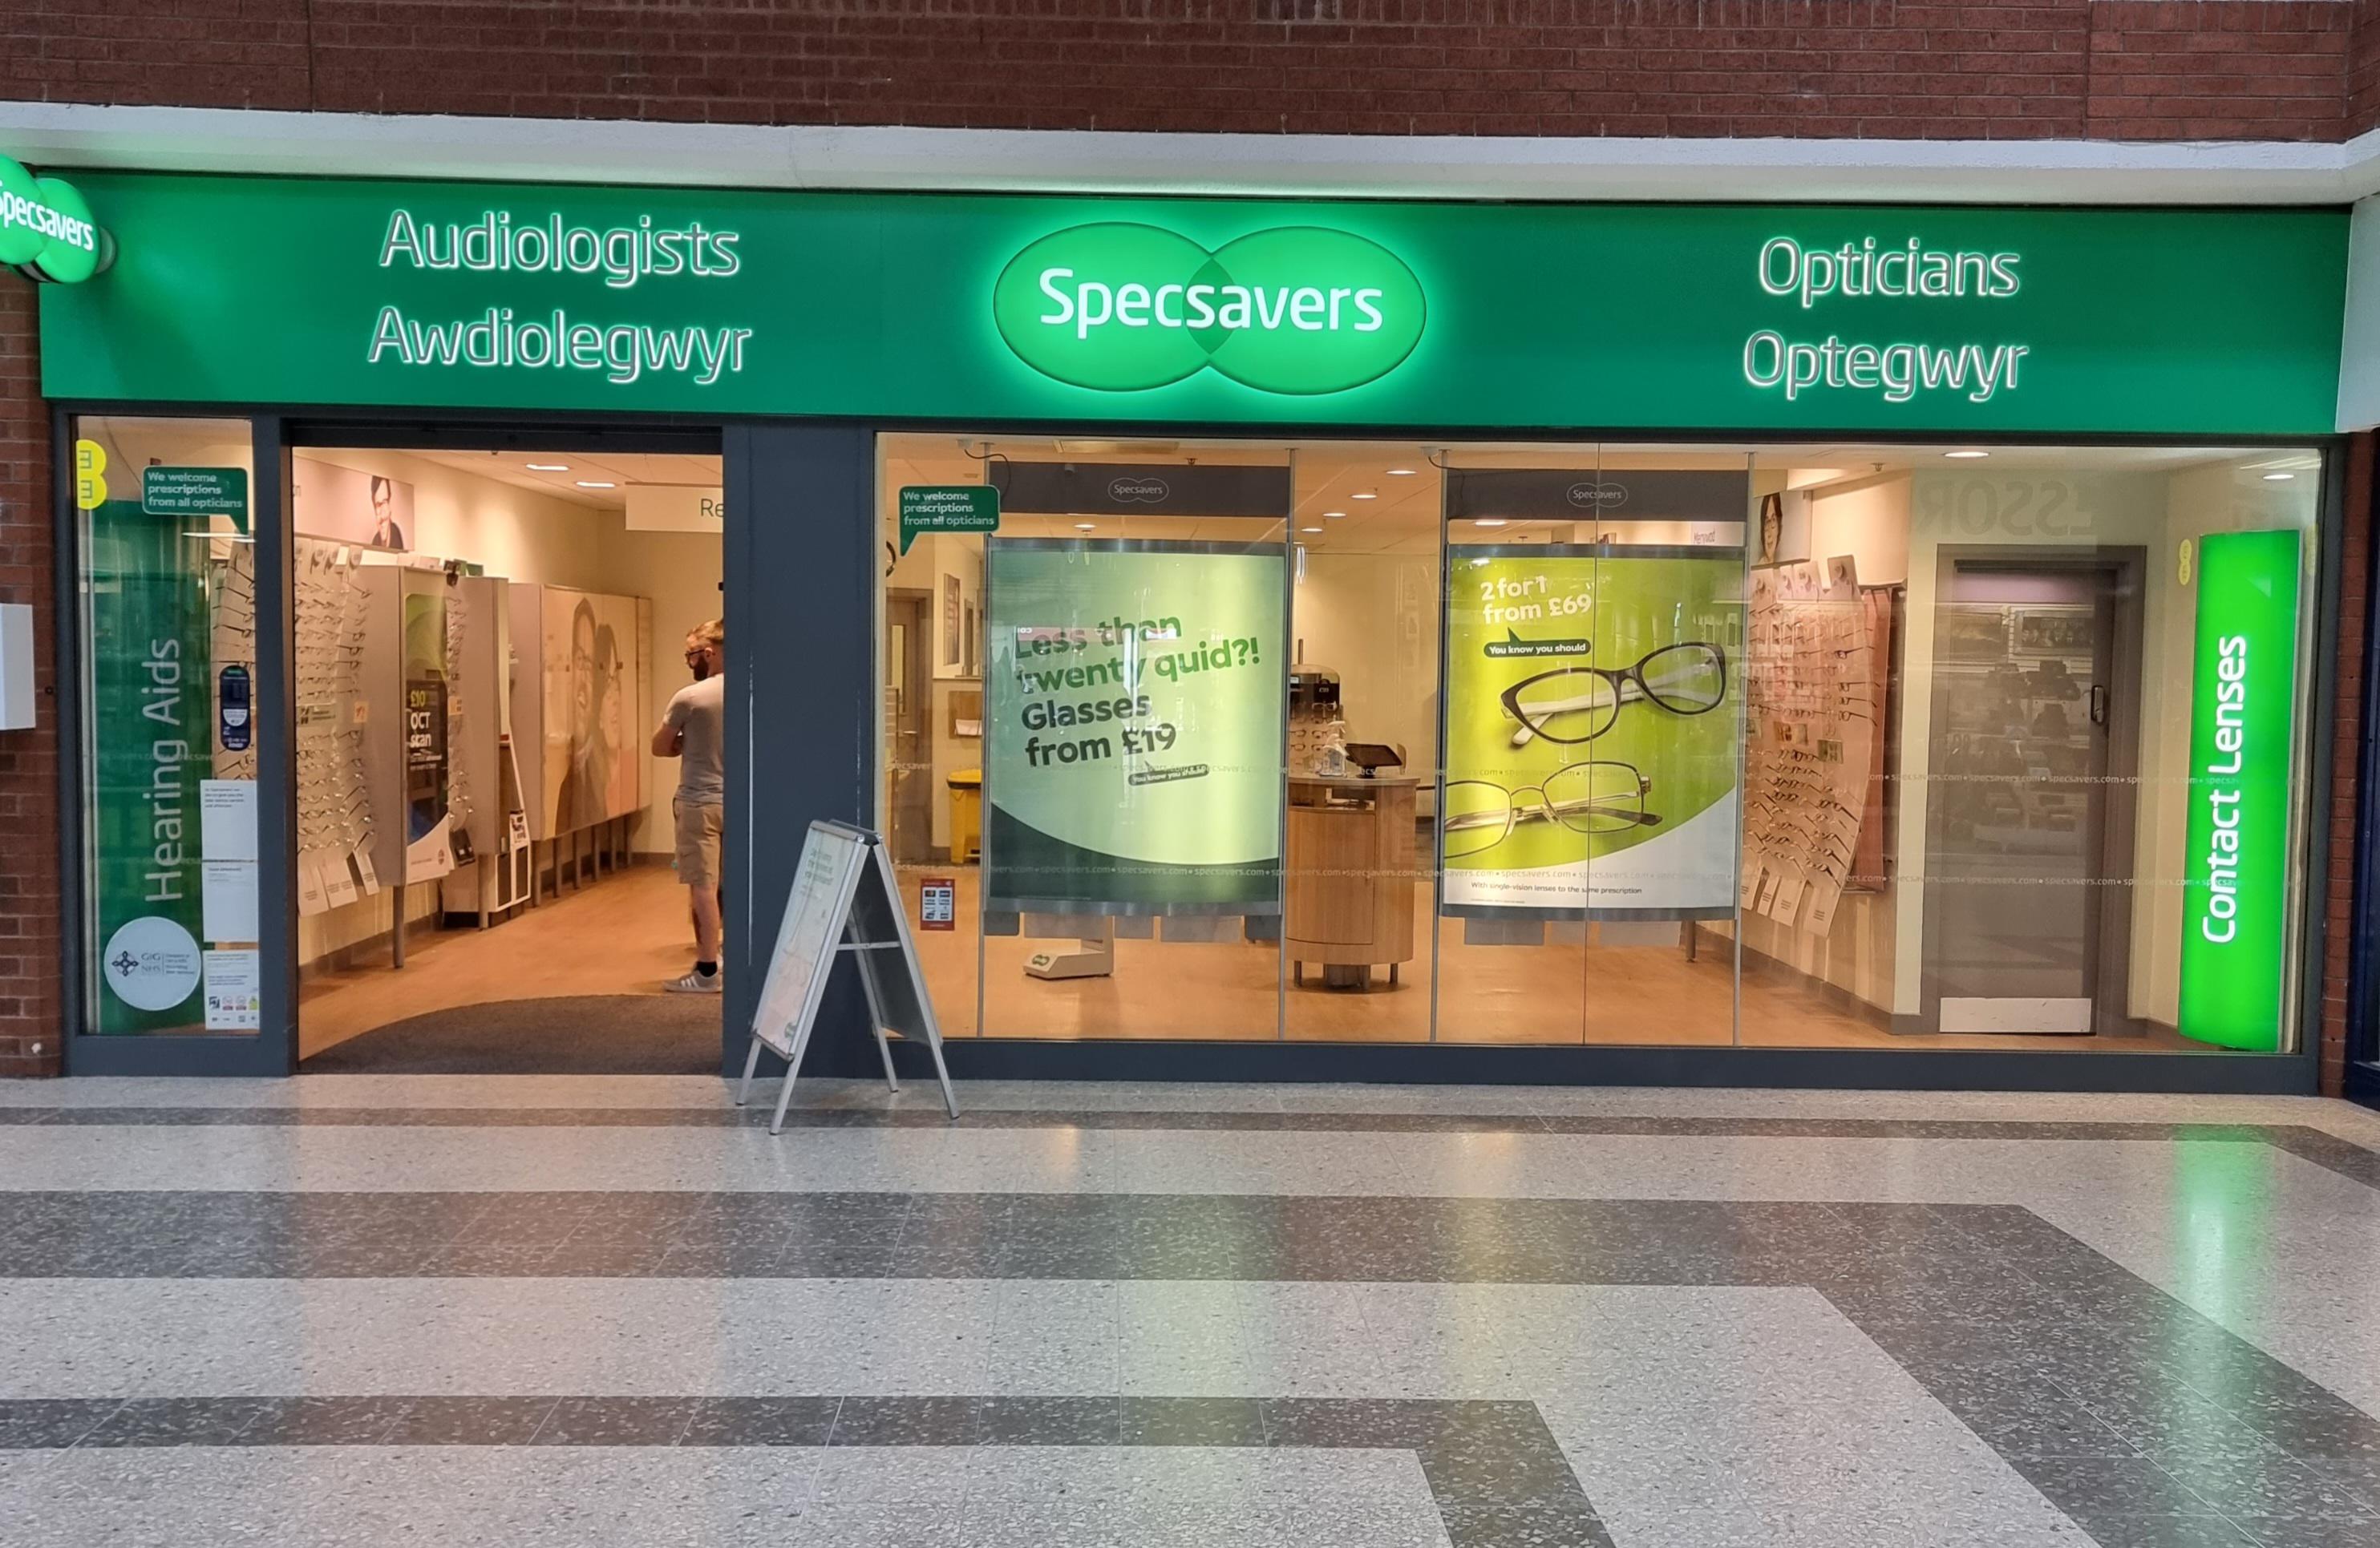 Specsavers Rhyl Specsavers Opticians and Audiologists - Rhyl Rhyl 01745 343200